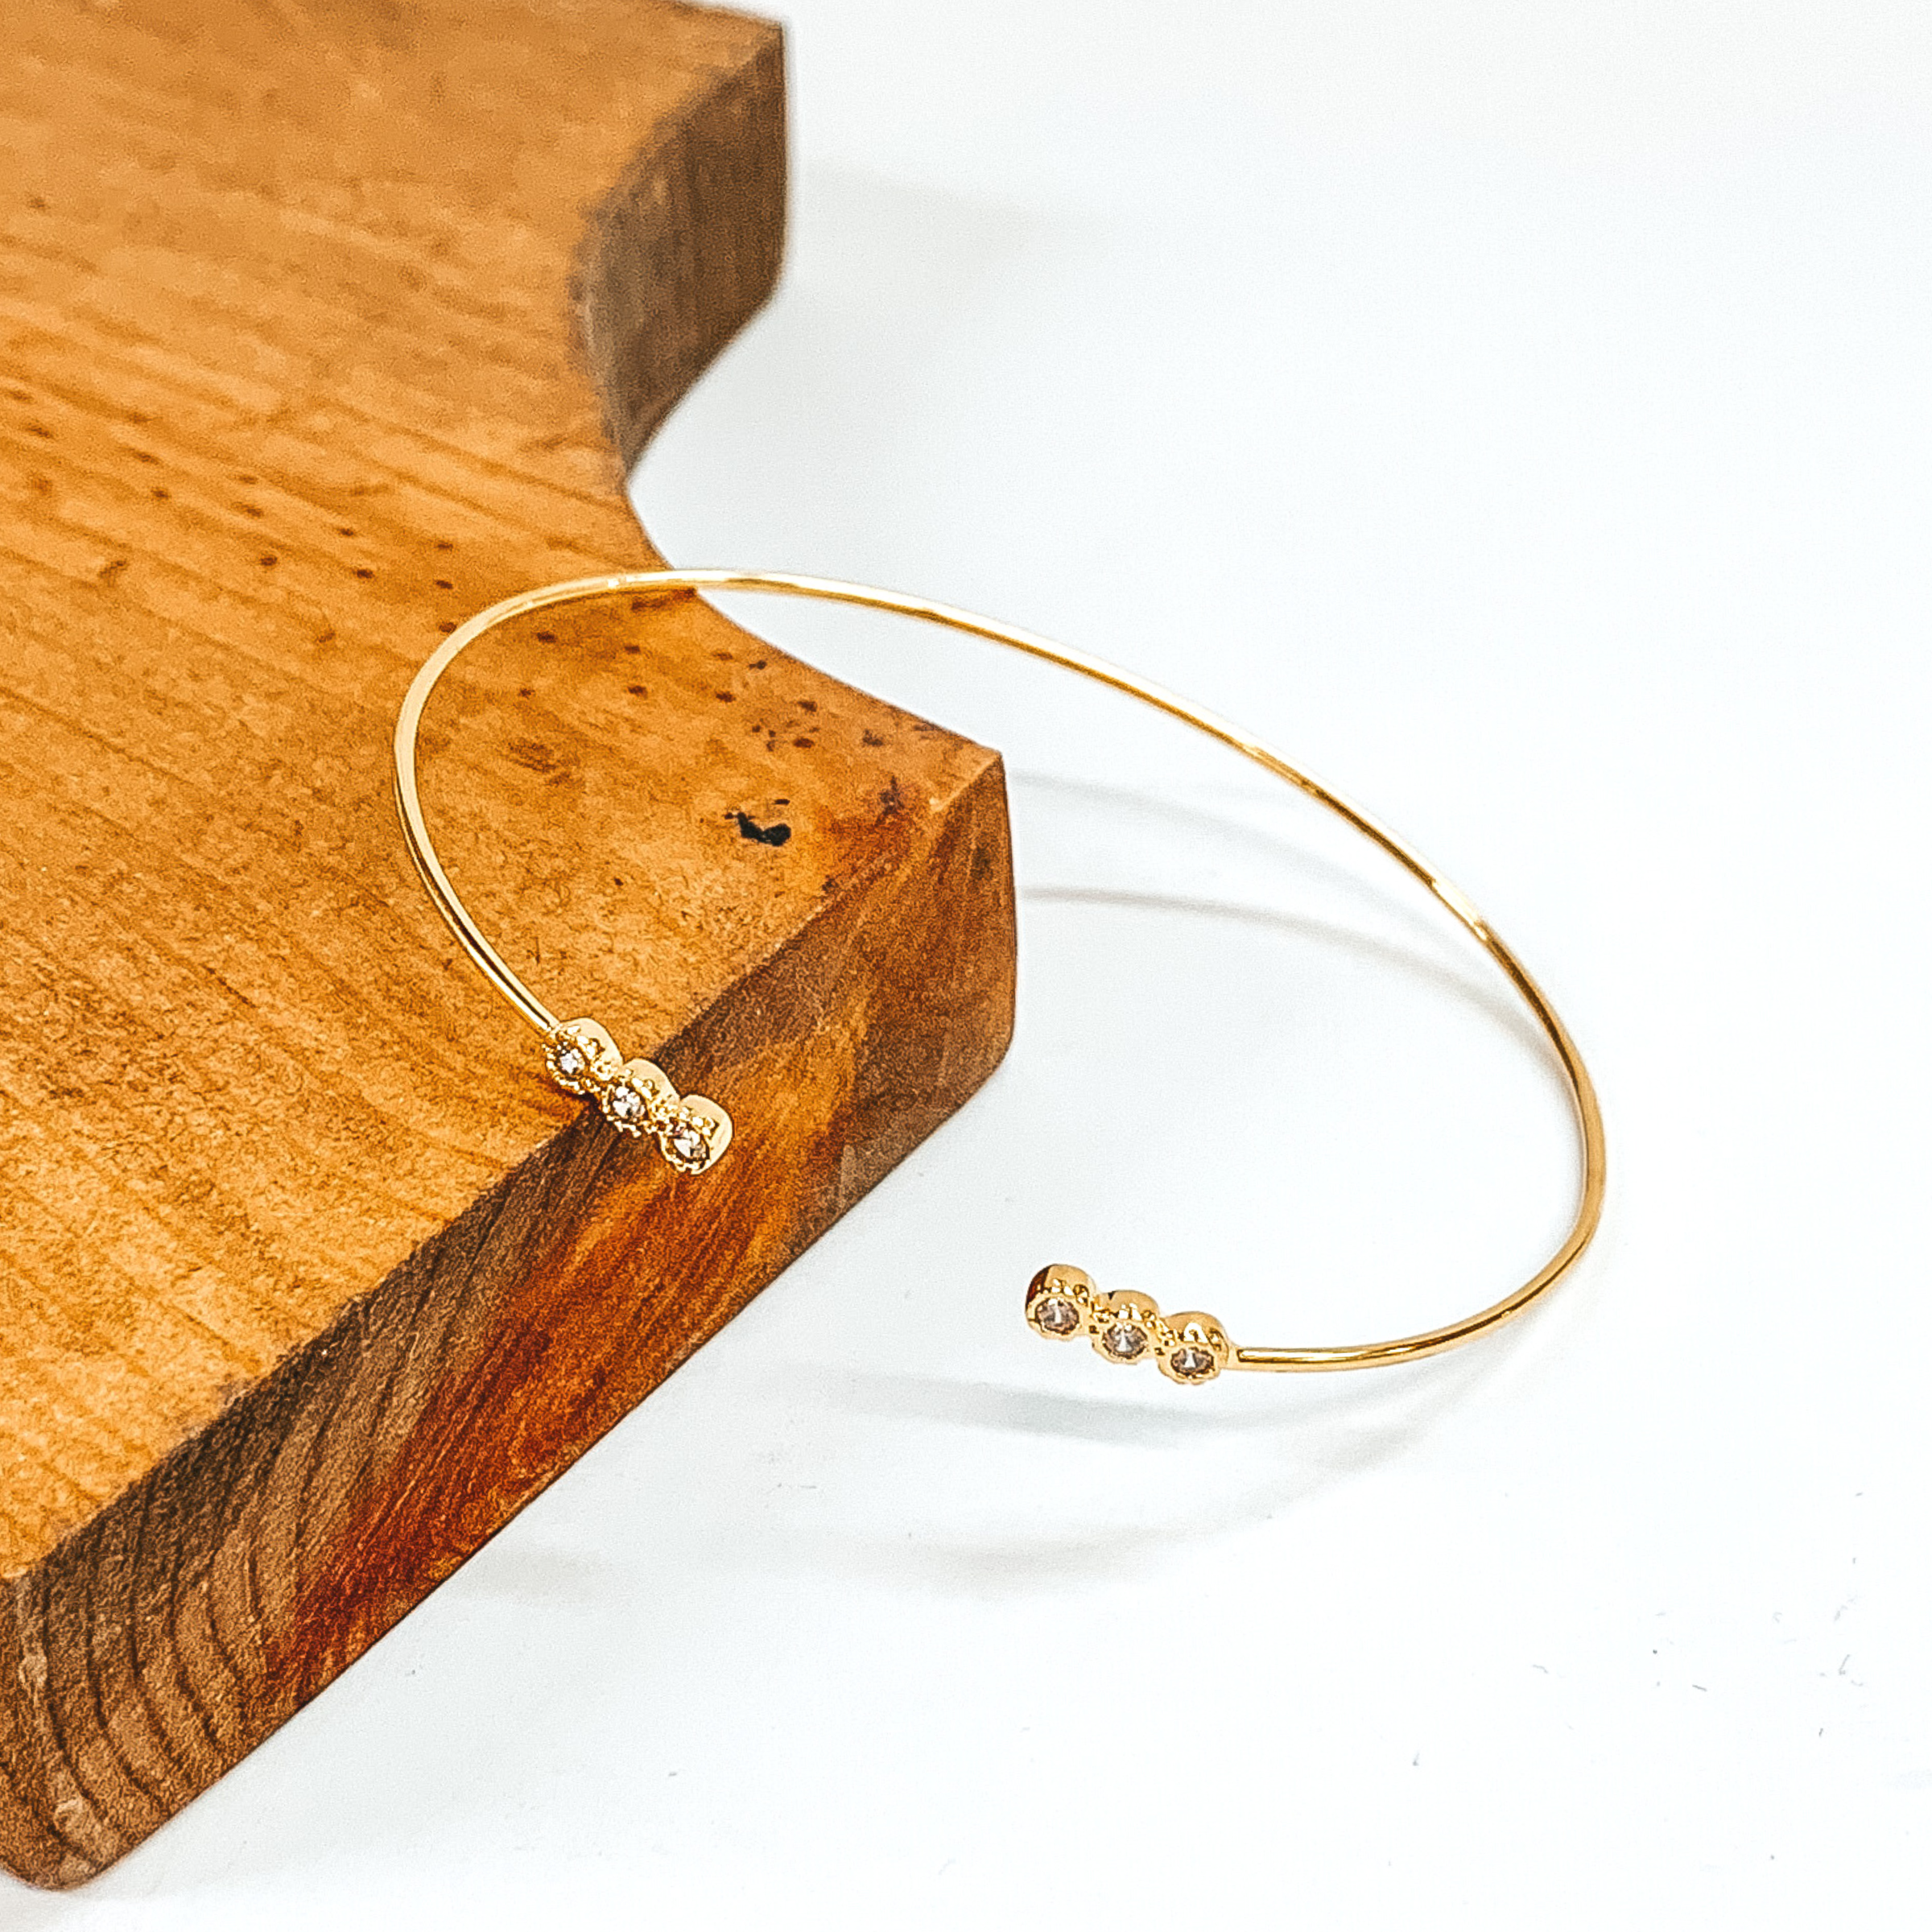 Thin, gold wire bangle with small, round tiny crystal ends outlined in gold. This bangle is pictured laying partially on a brown block on a white background. 